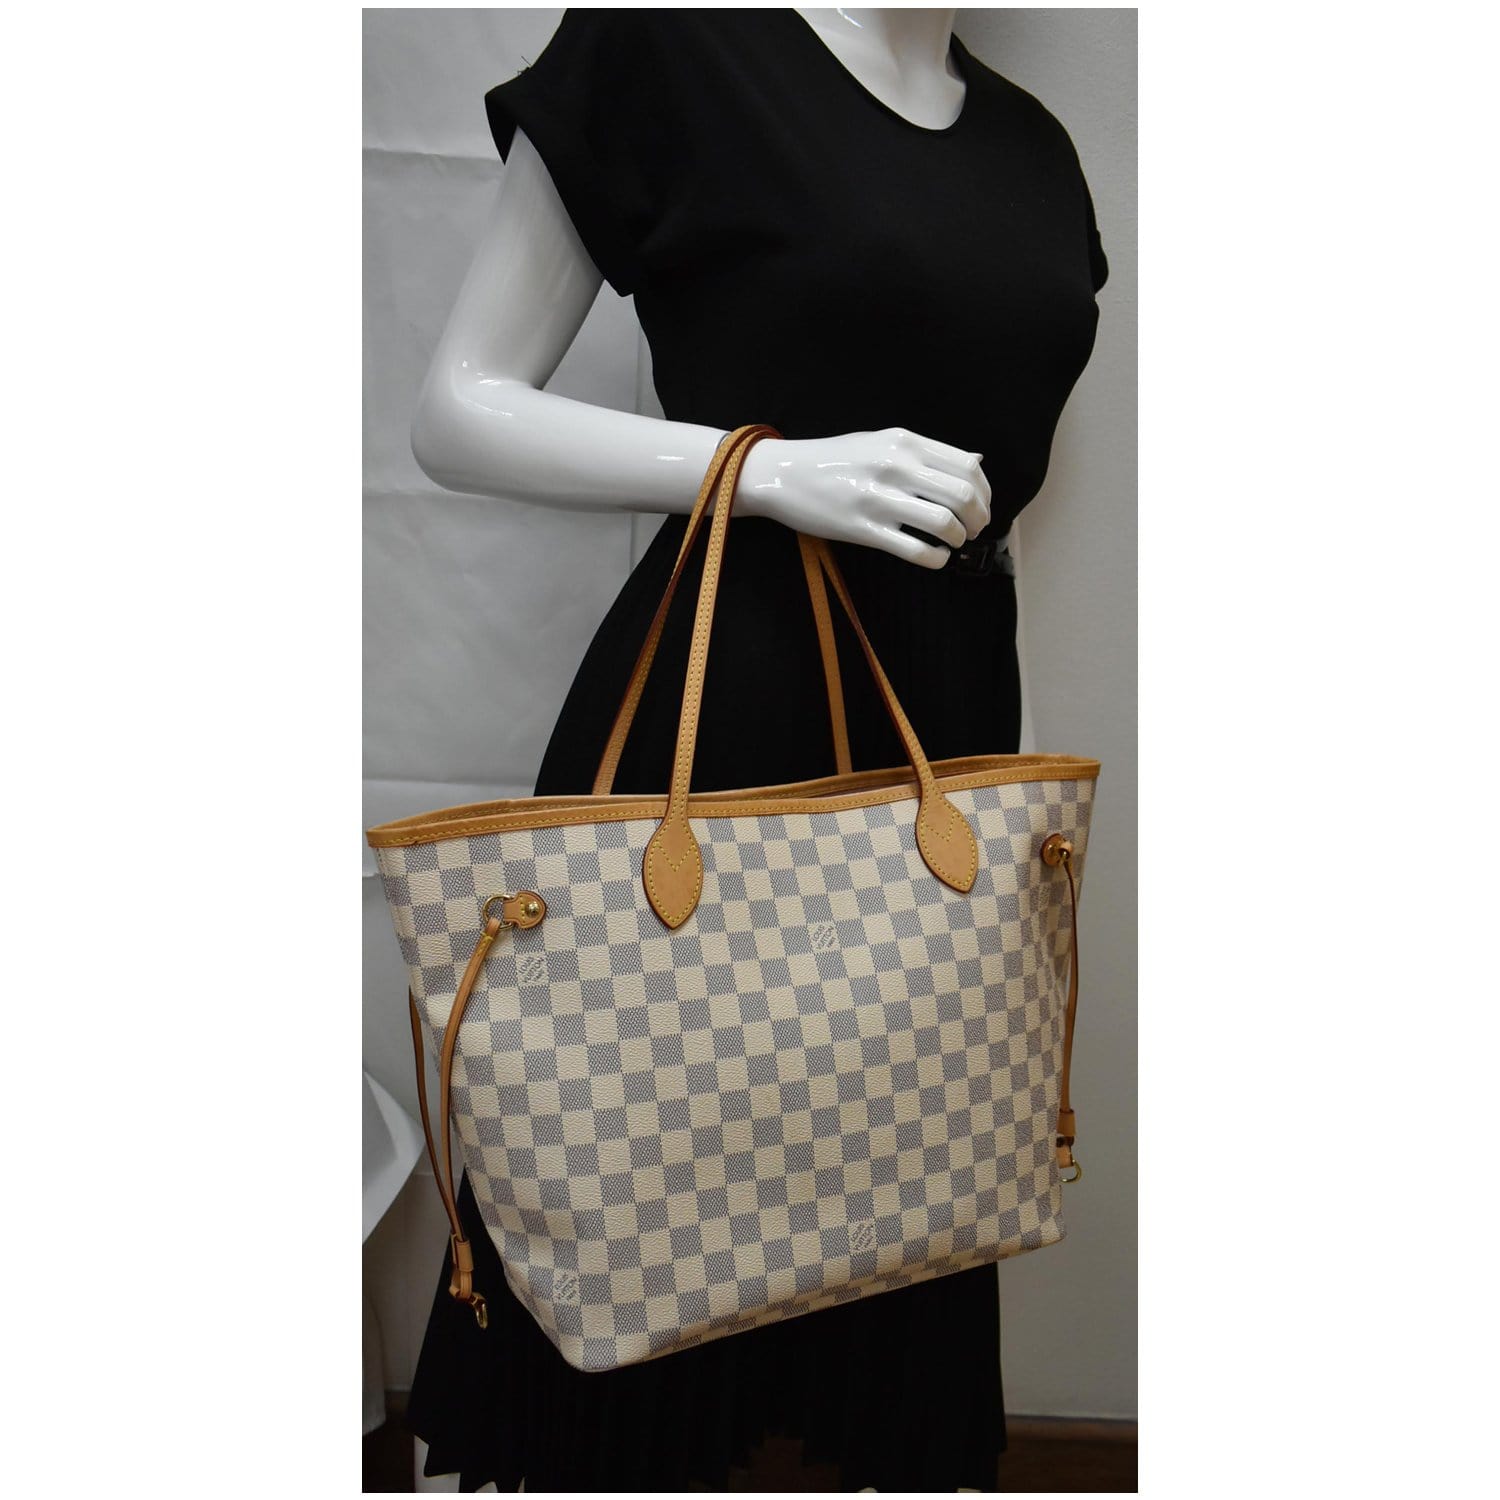 LOUIS VUITTON Neverfull MM Damier Azur Tote Bag White - Sold